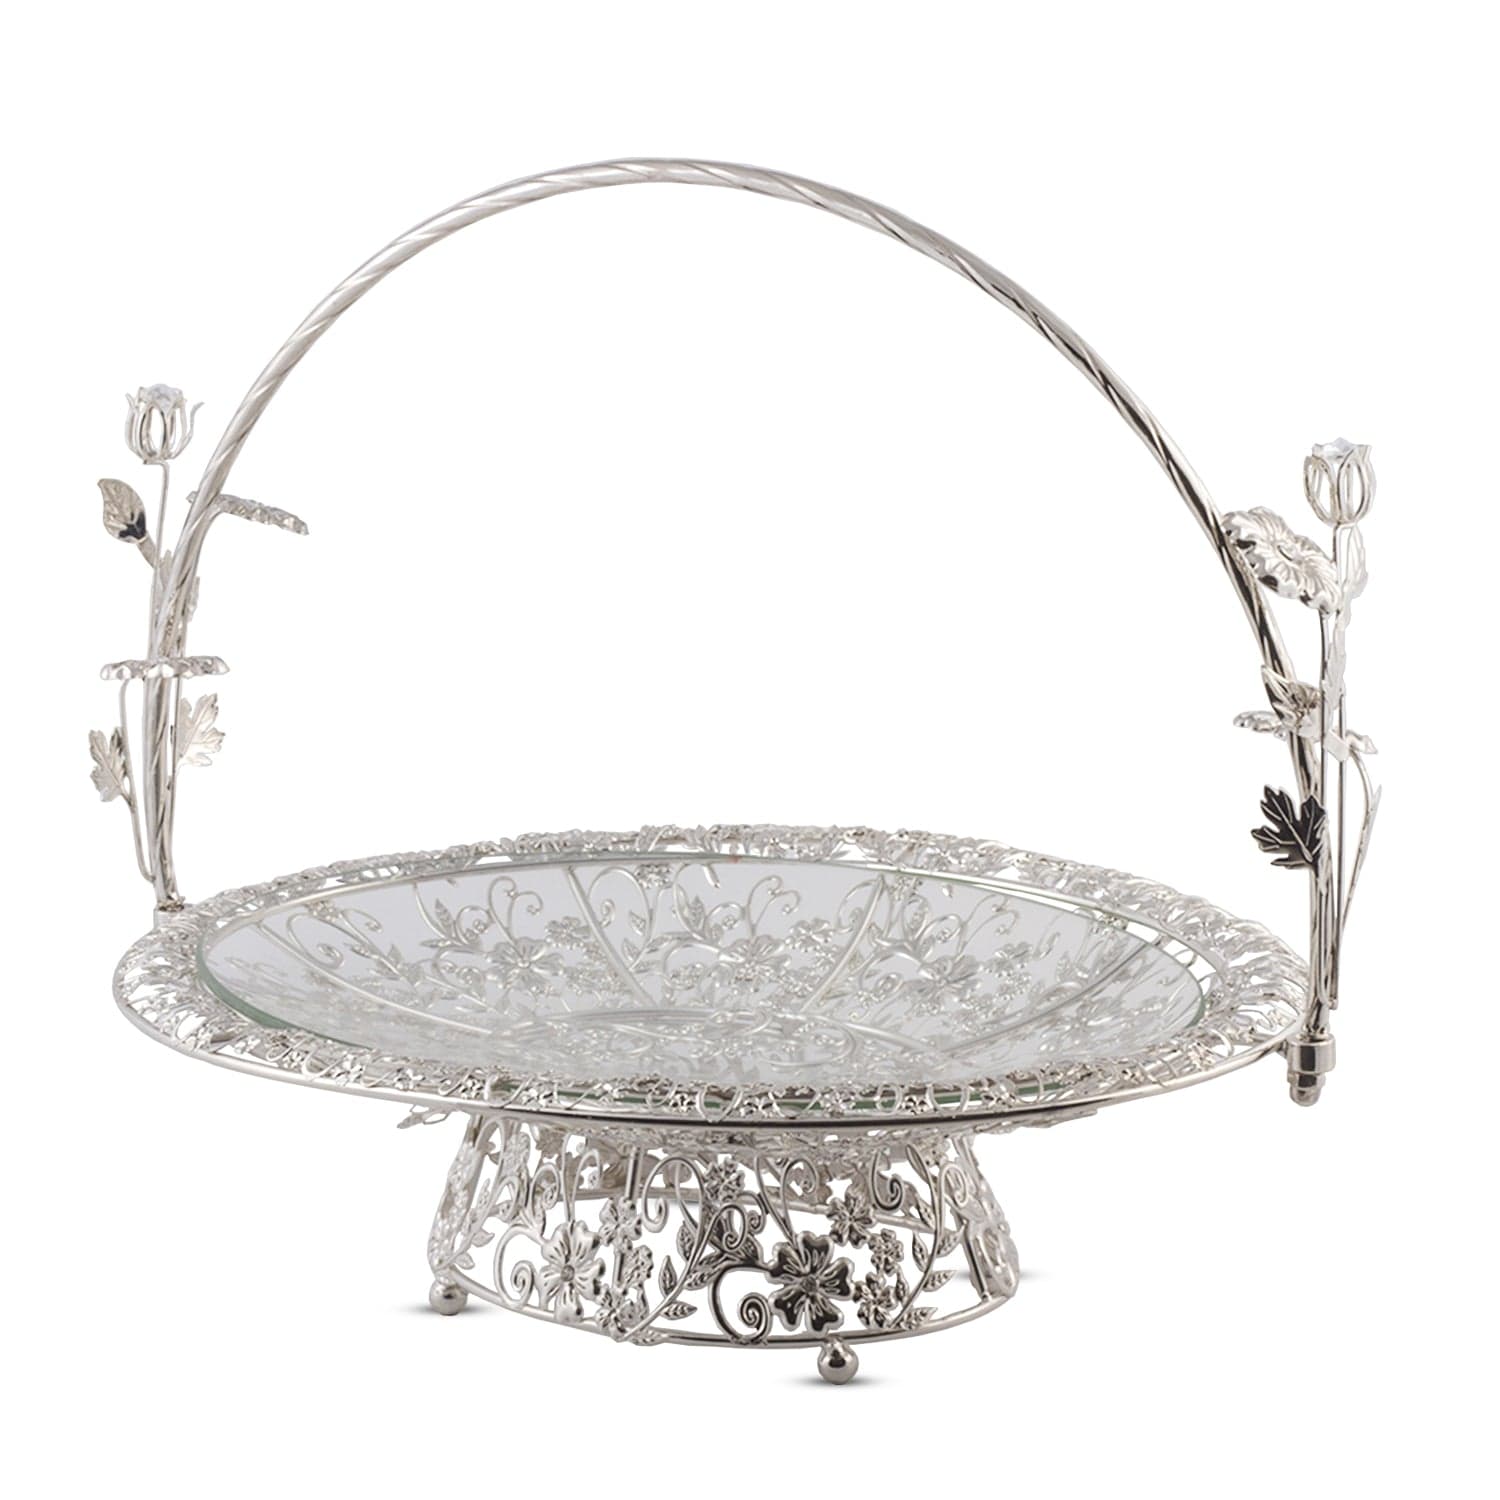 Red Butler dining_decor Silver Oval Tray SWOT0SG18Y18A1 GSOT18A1 Redbutler